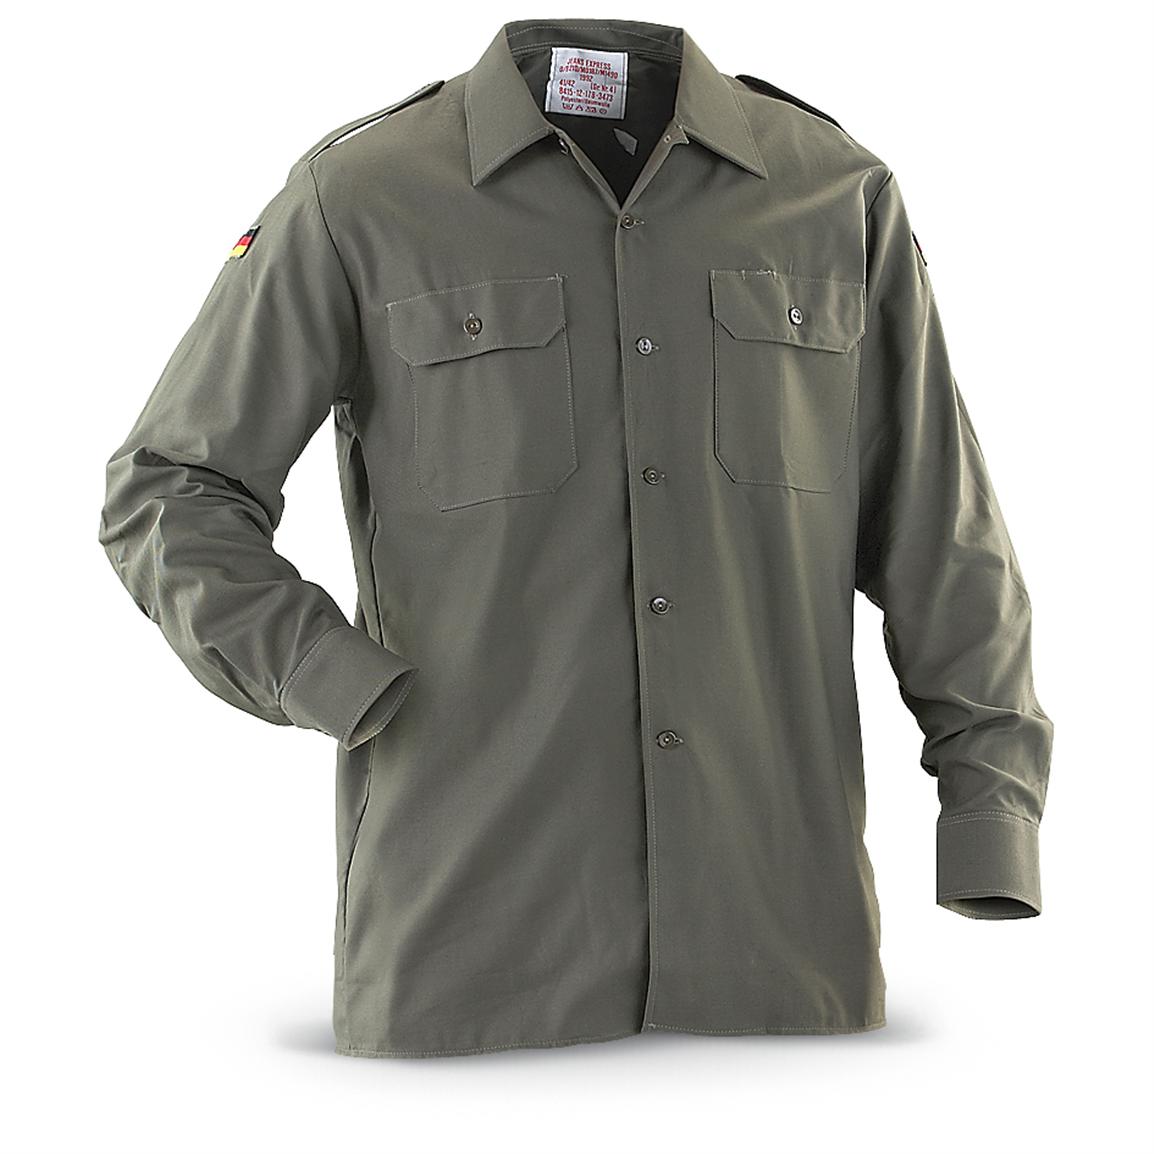 New German Military Surplus Field Shirt, Olive Drab - 190666, Military & Tactical Shirts at